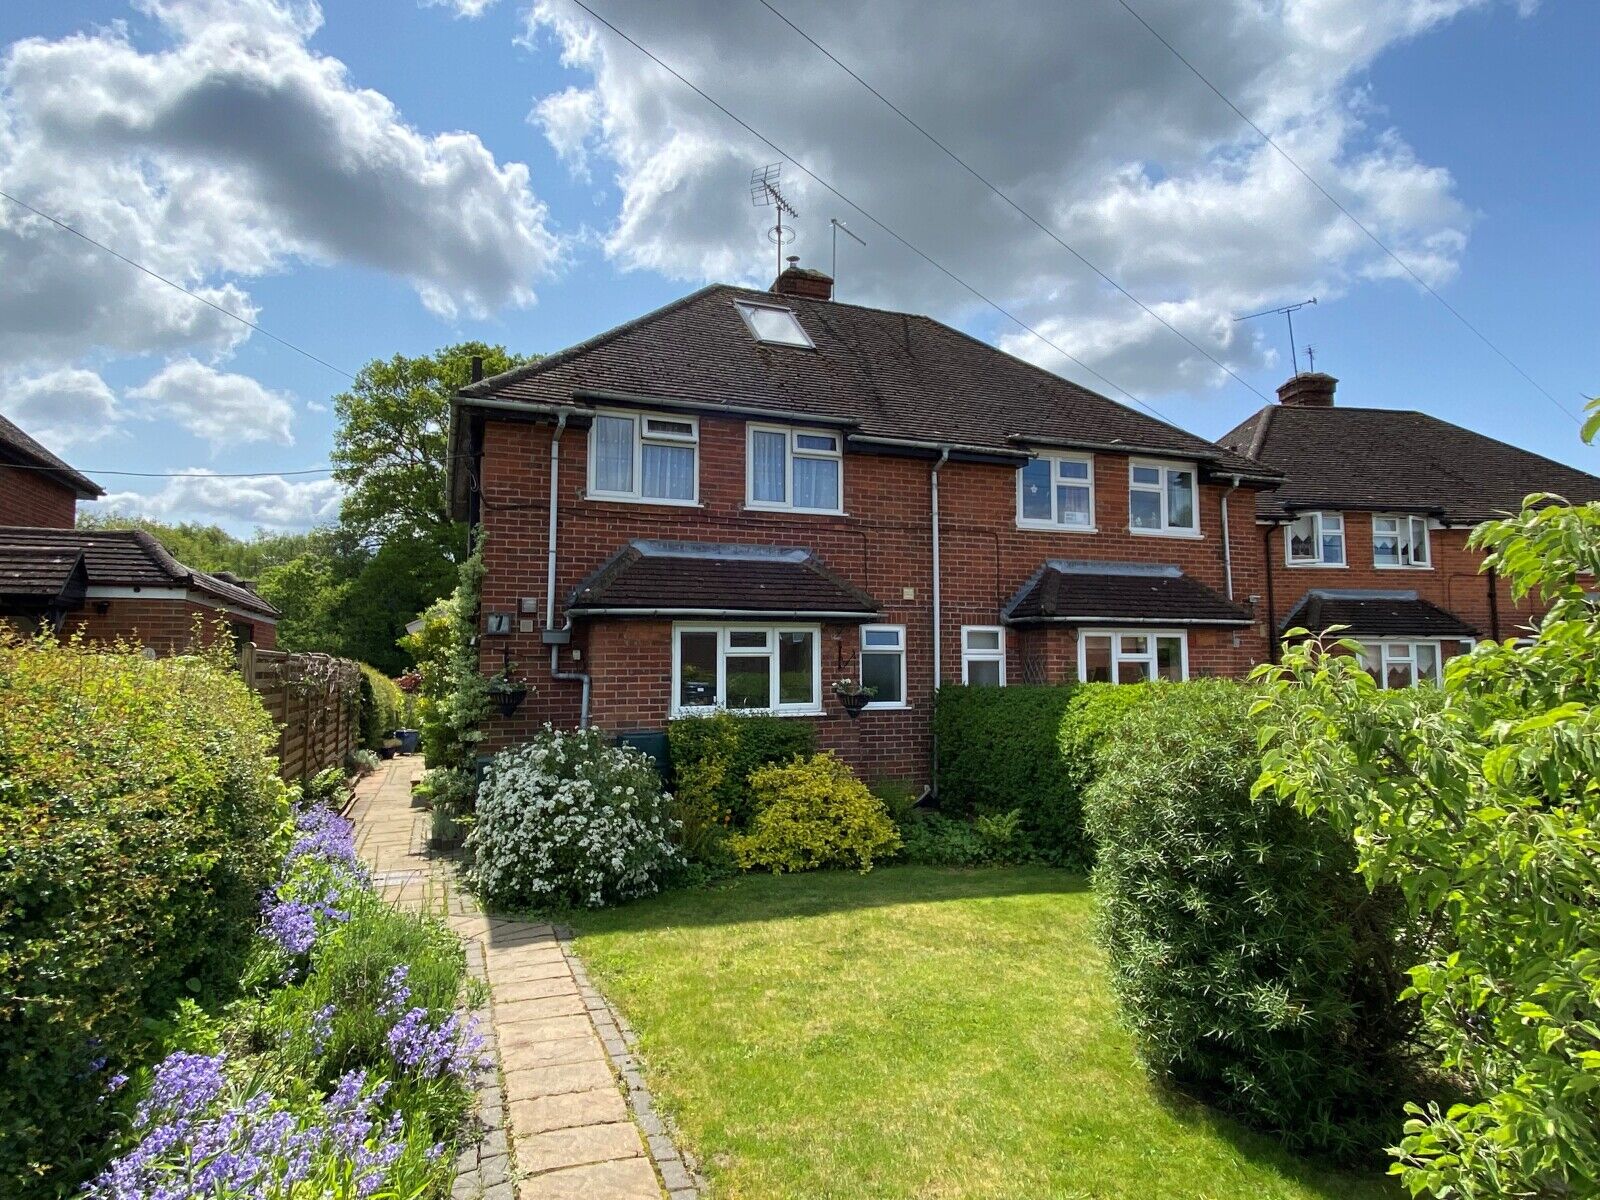 3 bedroom semi detached house for sale Priest Close, Nettlebed, RG9, main image